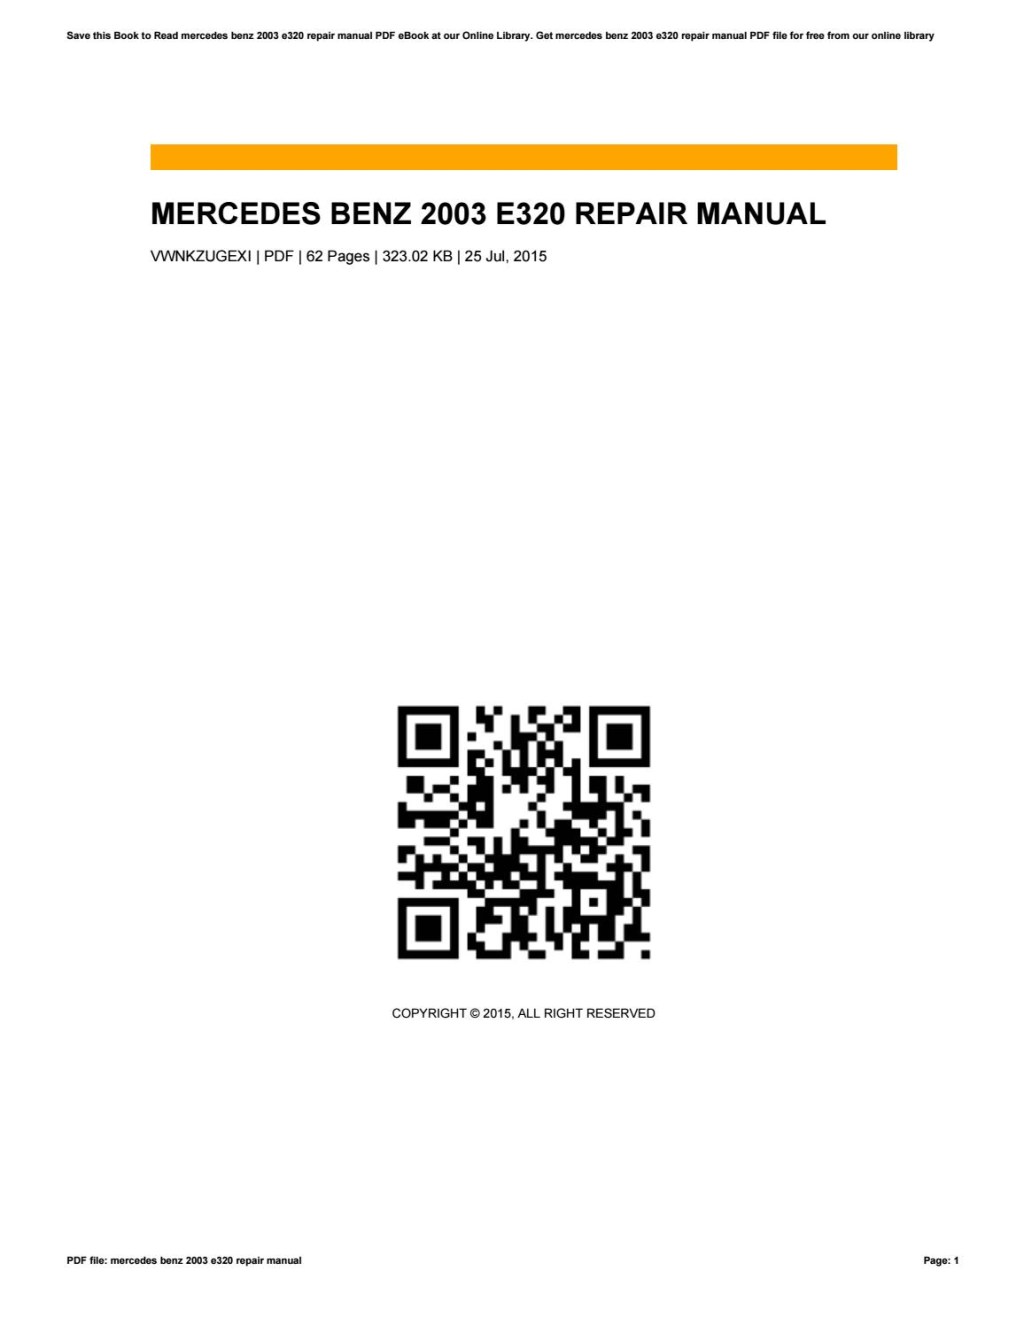 Picture of: Mercedes benz  e repair manual by Emily – Issuu